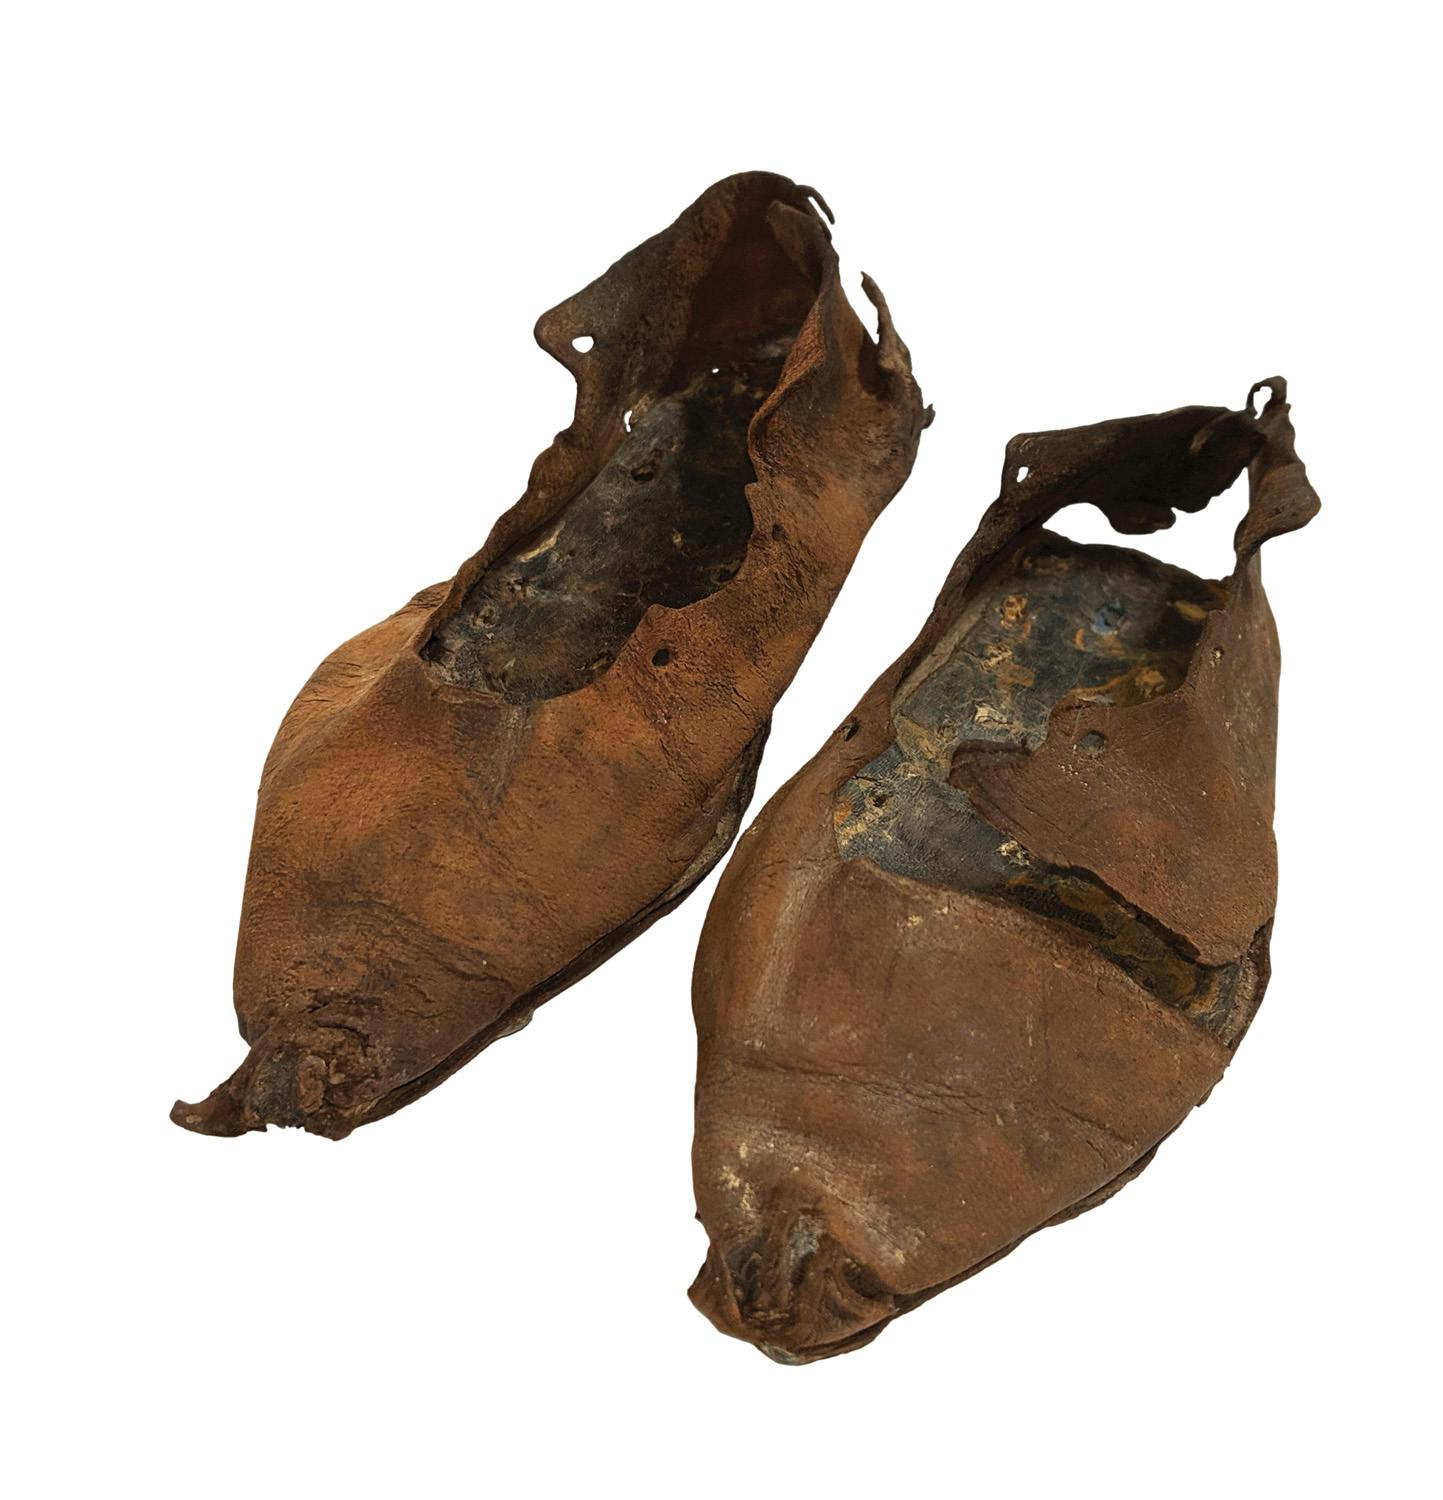 Worn by the Gods. The Art of shoemaking in the ancient world, the epic movie and contemporary fashion